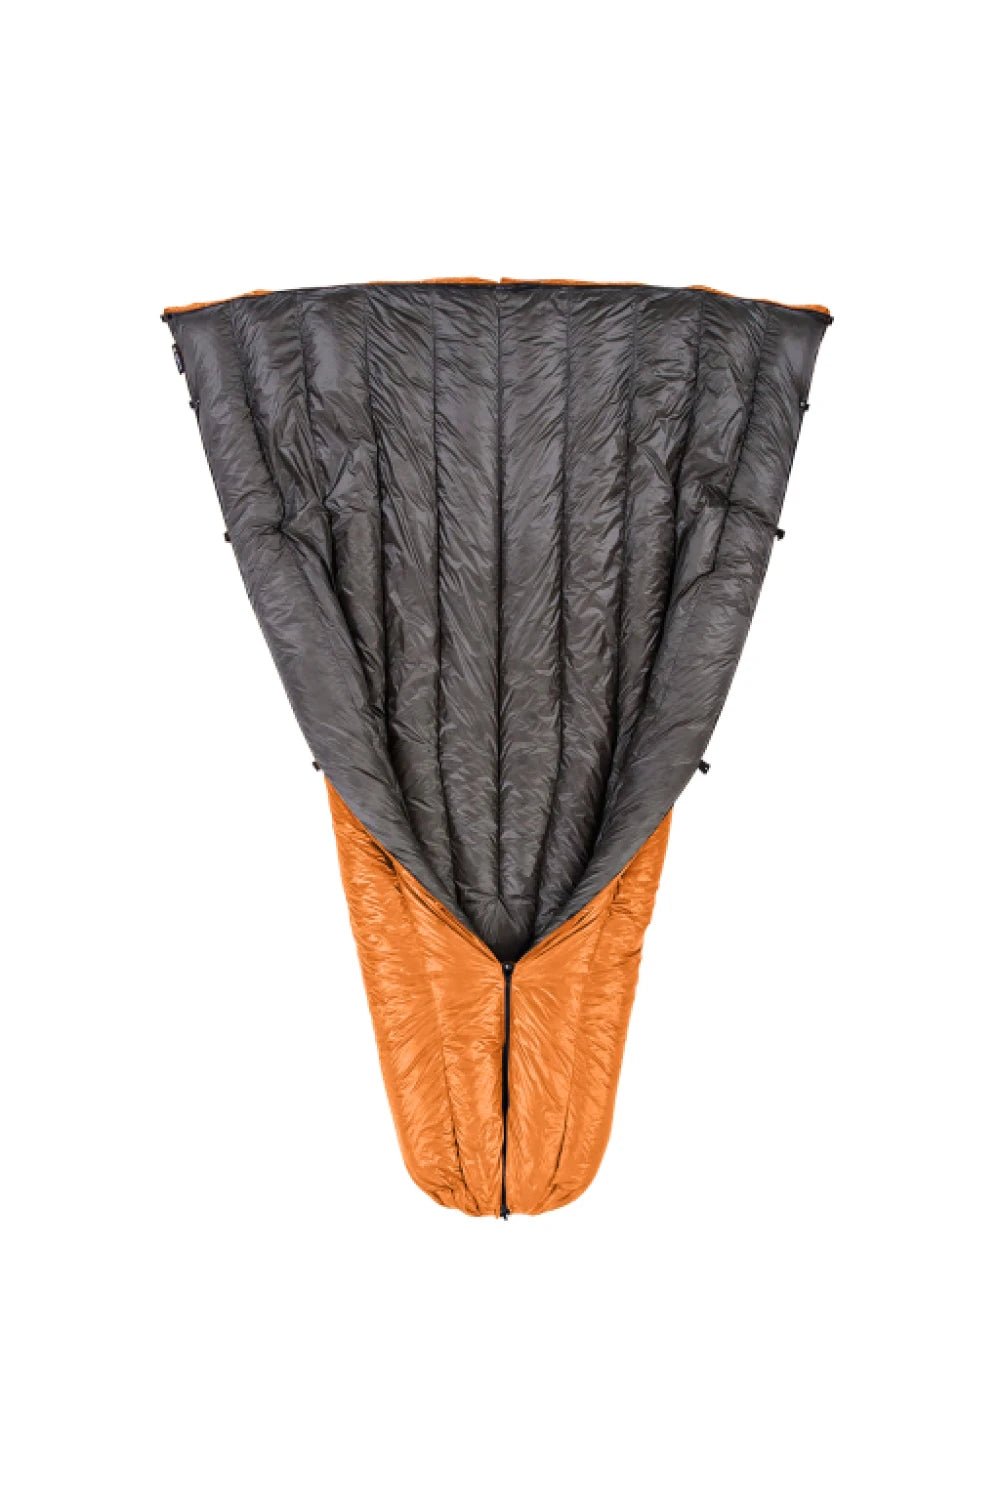 Enlightened Equipment Revelation Quilt 850 Fill Down - Forest Green / Charcoal | Coffee Outdoors